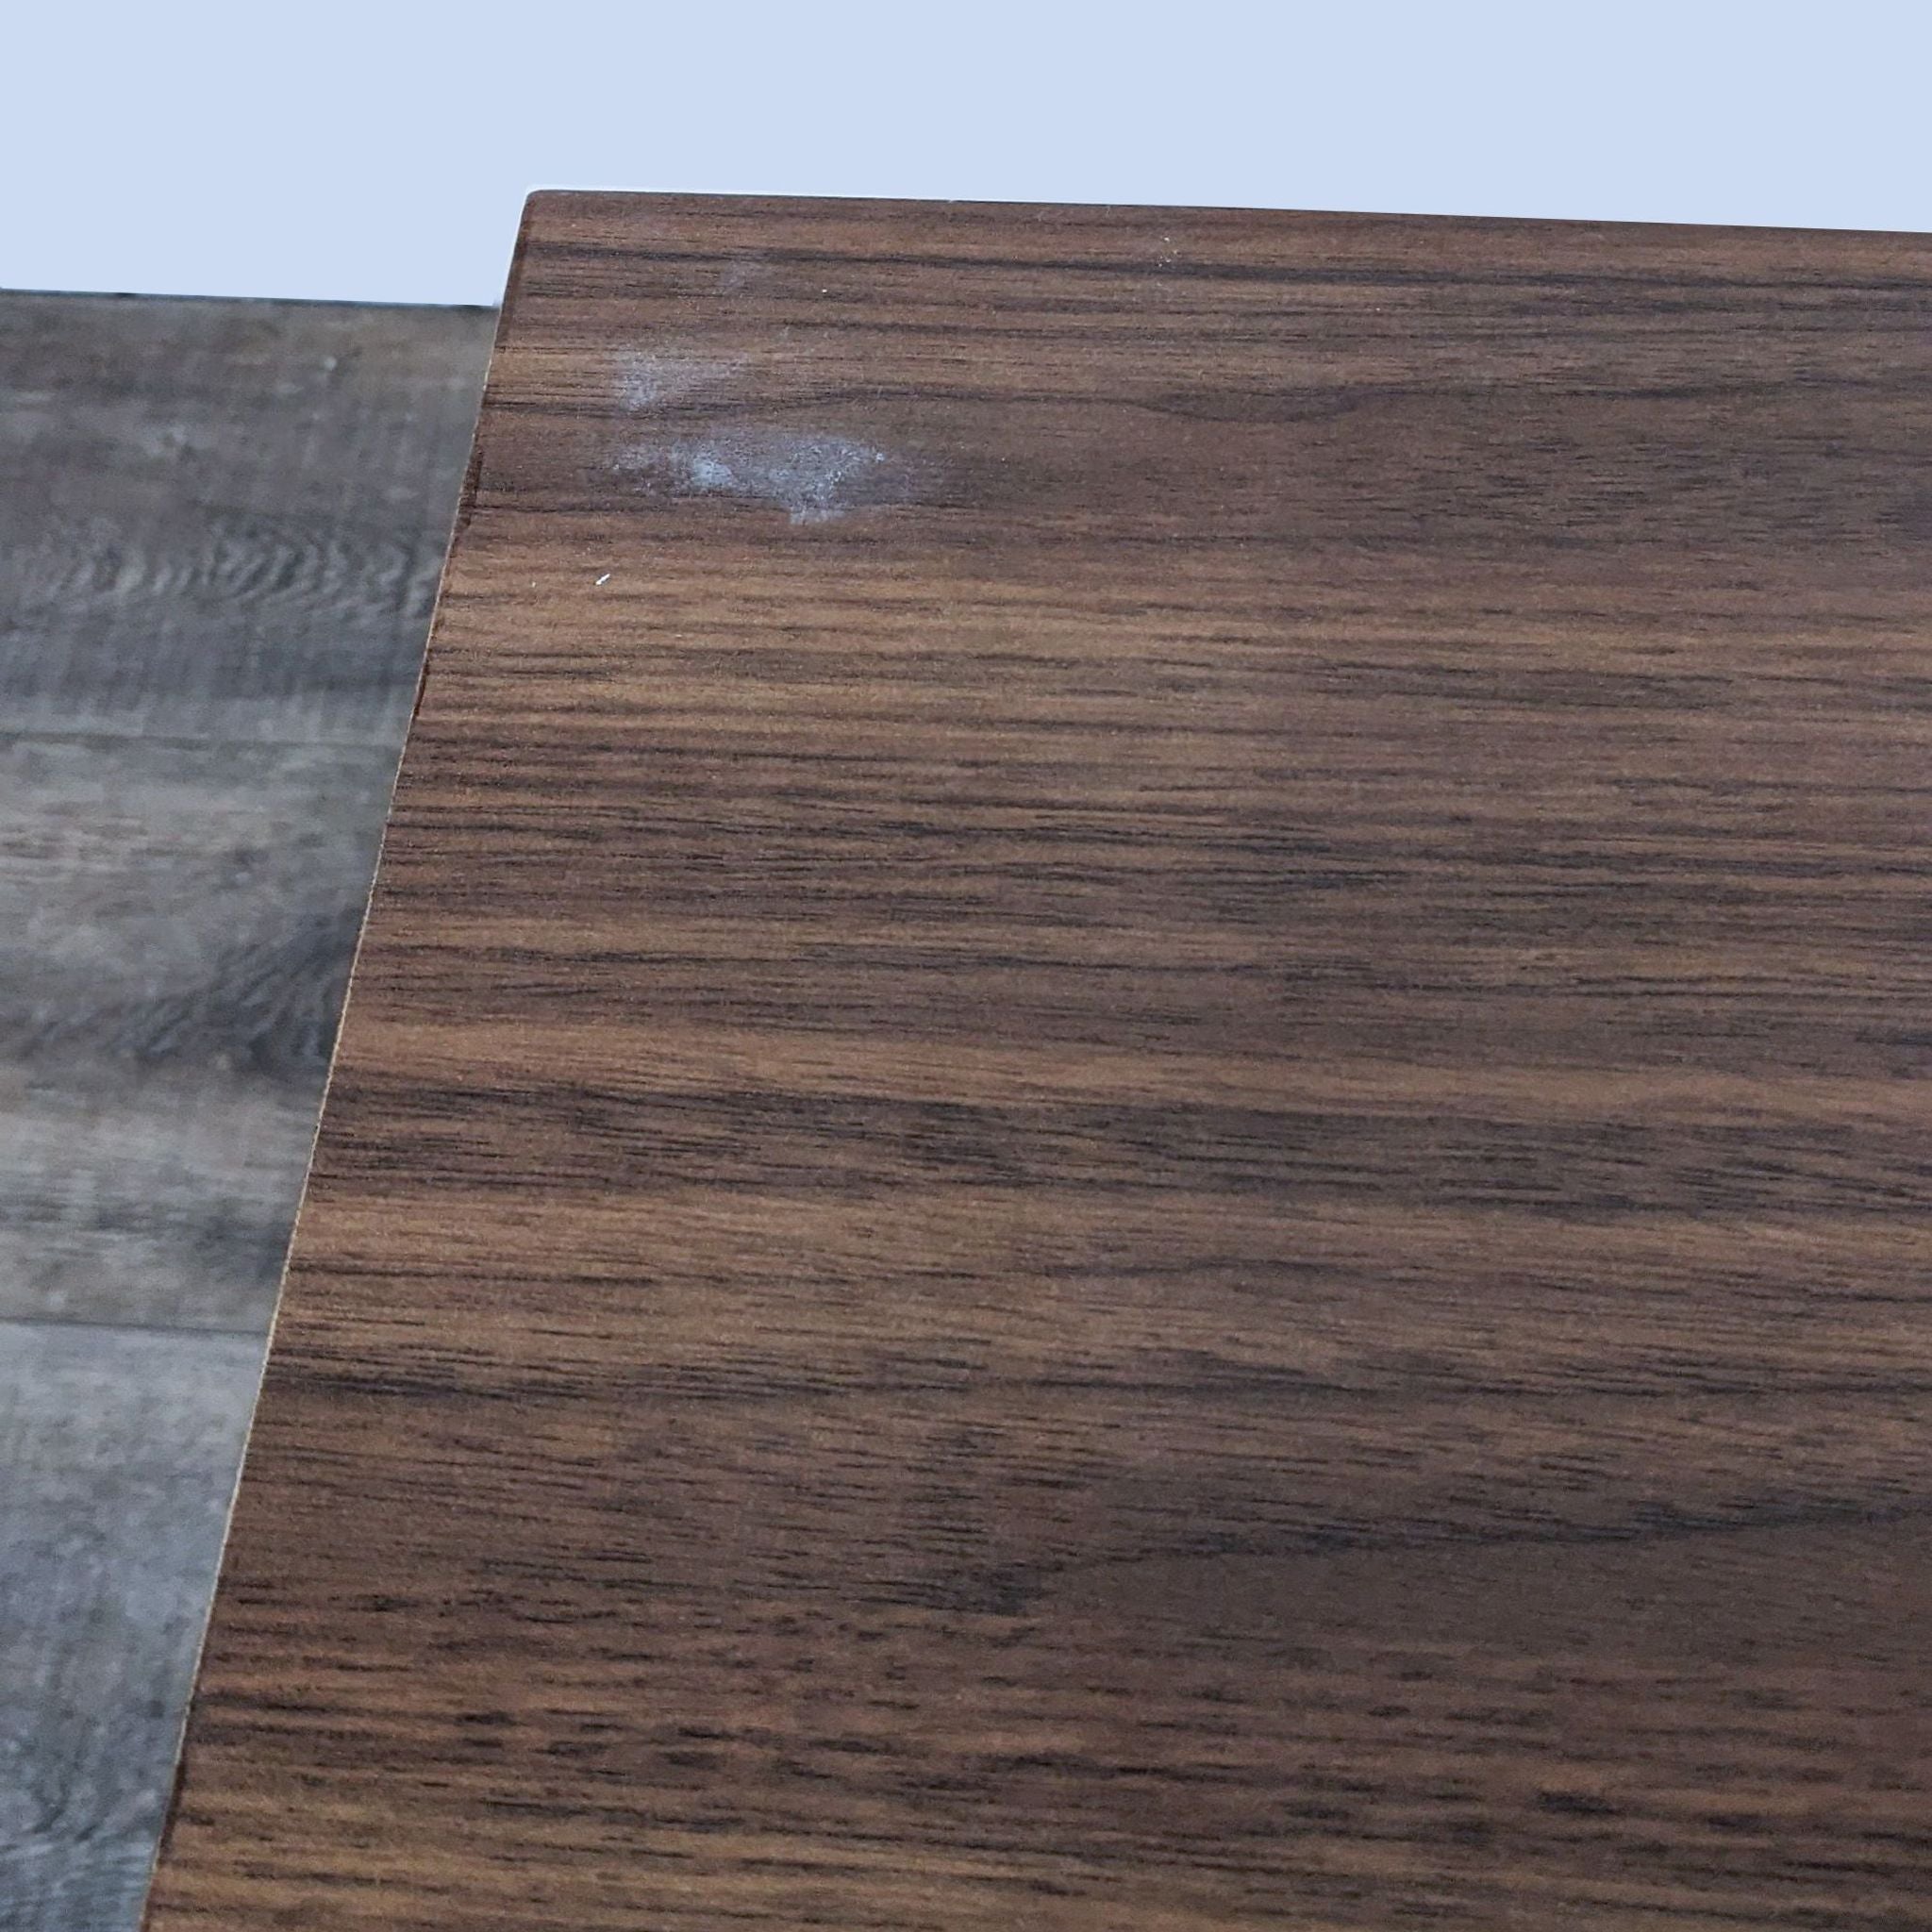 Close-up of Reperch end table surface showing wooden texture and a small white scuff mark on the right side.